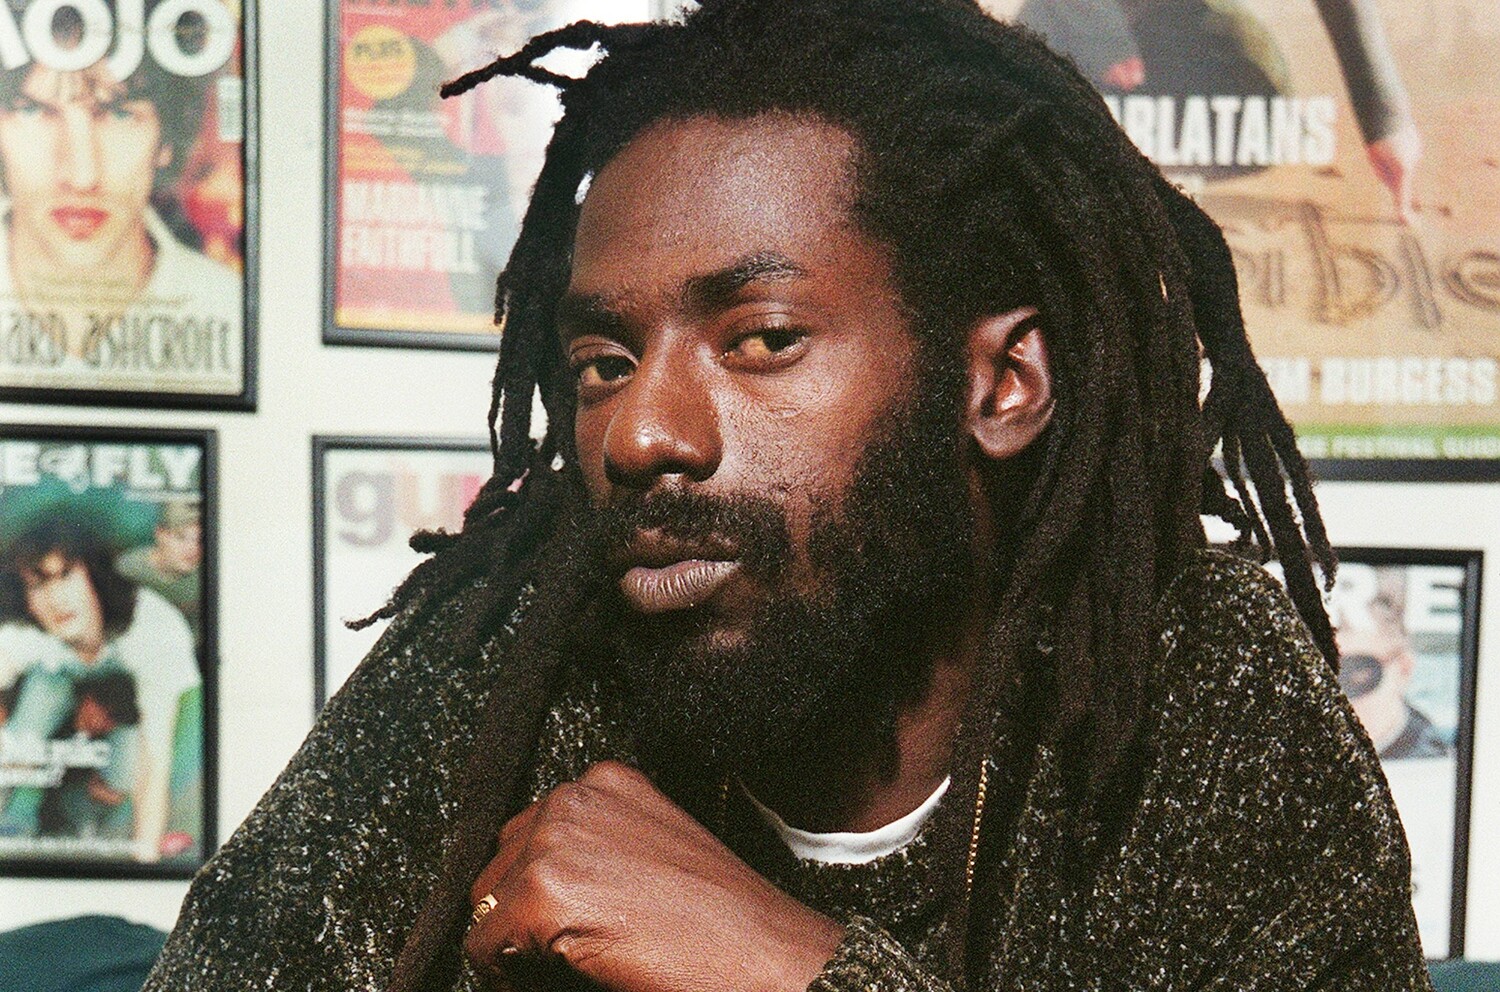 Buju Banton - Early Efforts to Support His Sentencing (Oct 17, 2011) - .mp4